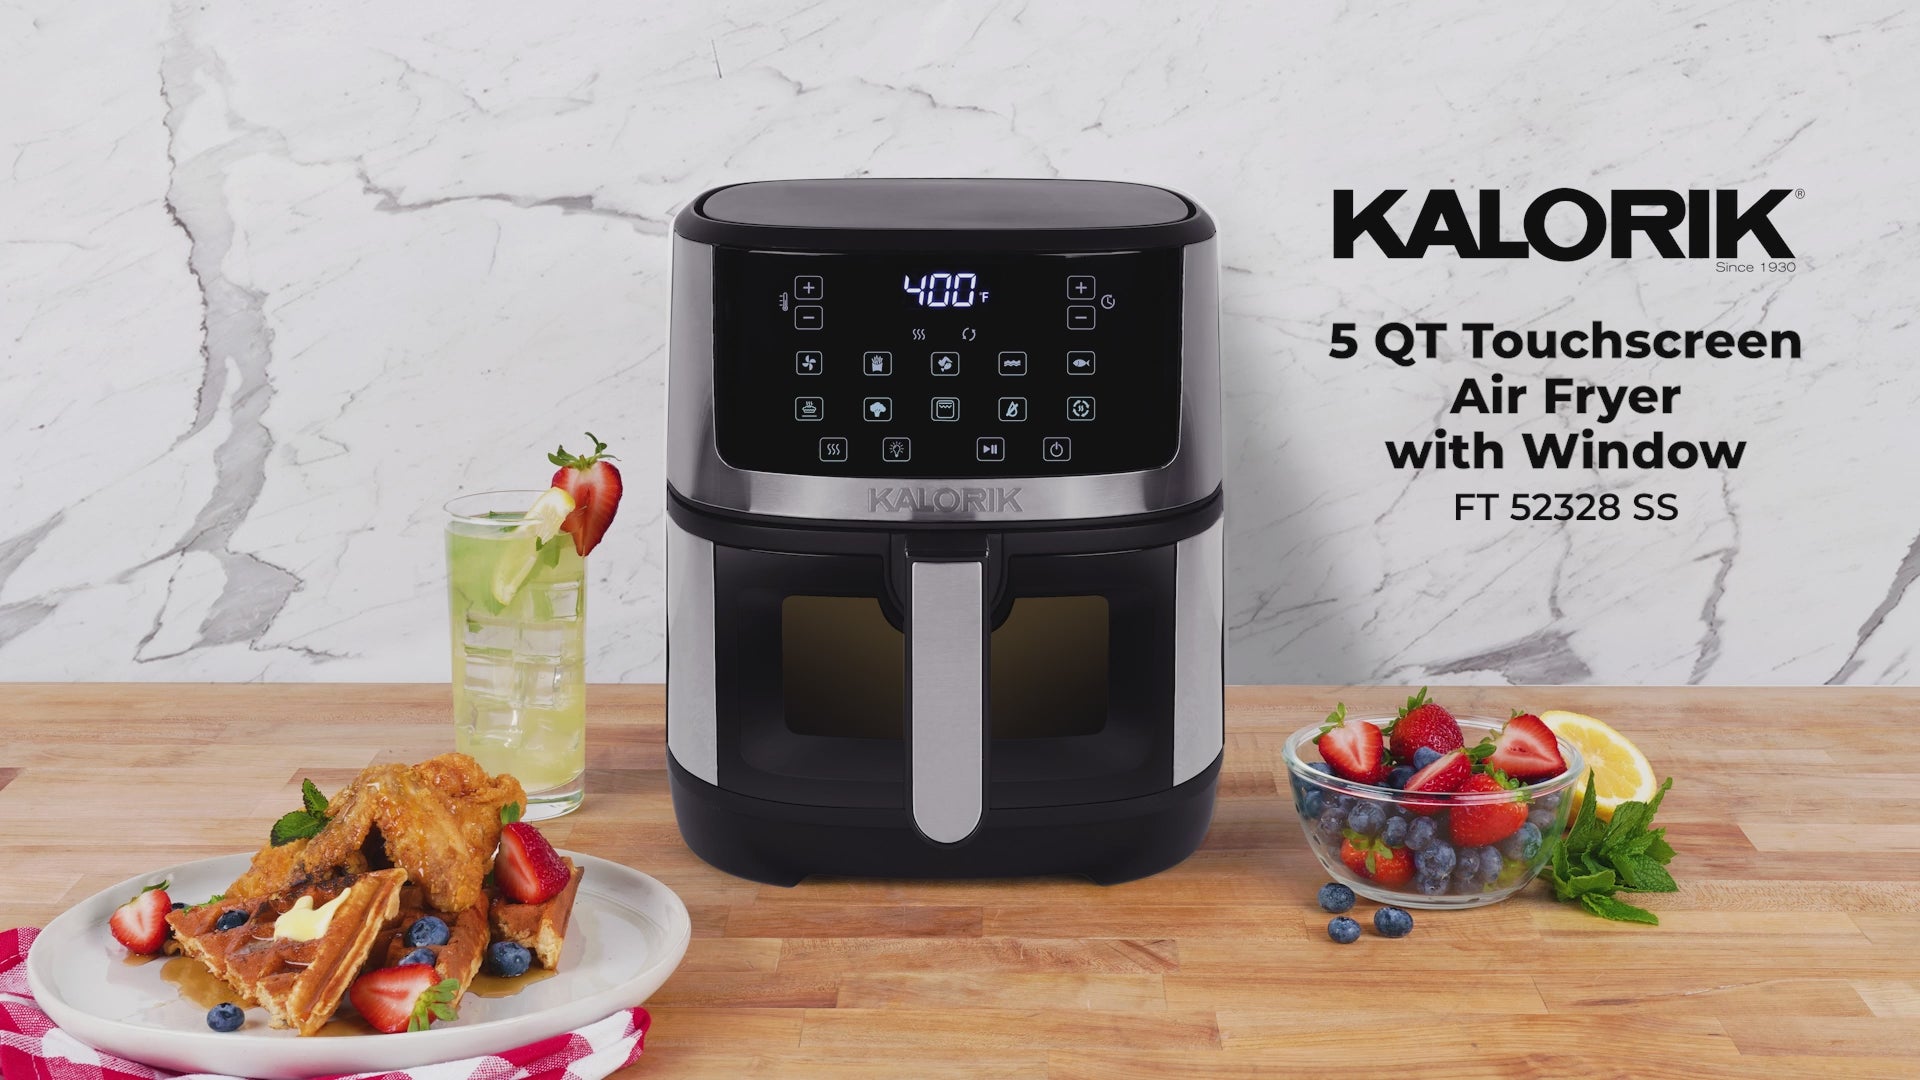 FT 52328 SS - Kalorik® 5-Quart Touchscreen Air Fryer with Window, Stainless Steel Product Video